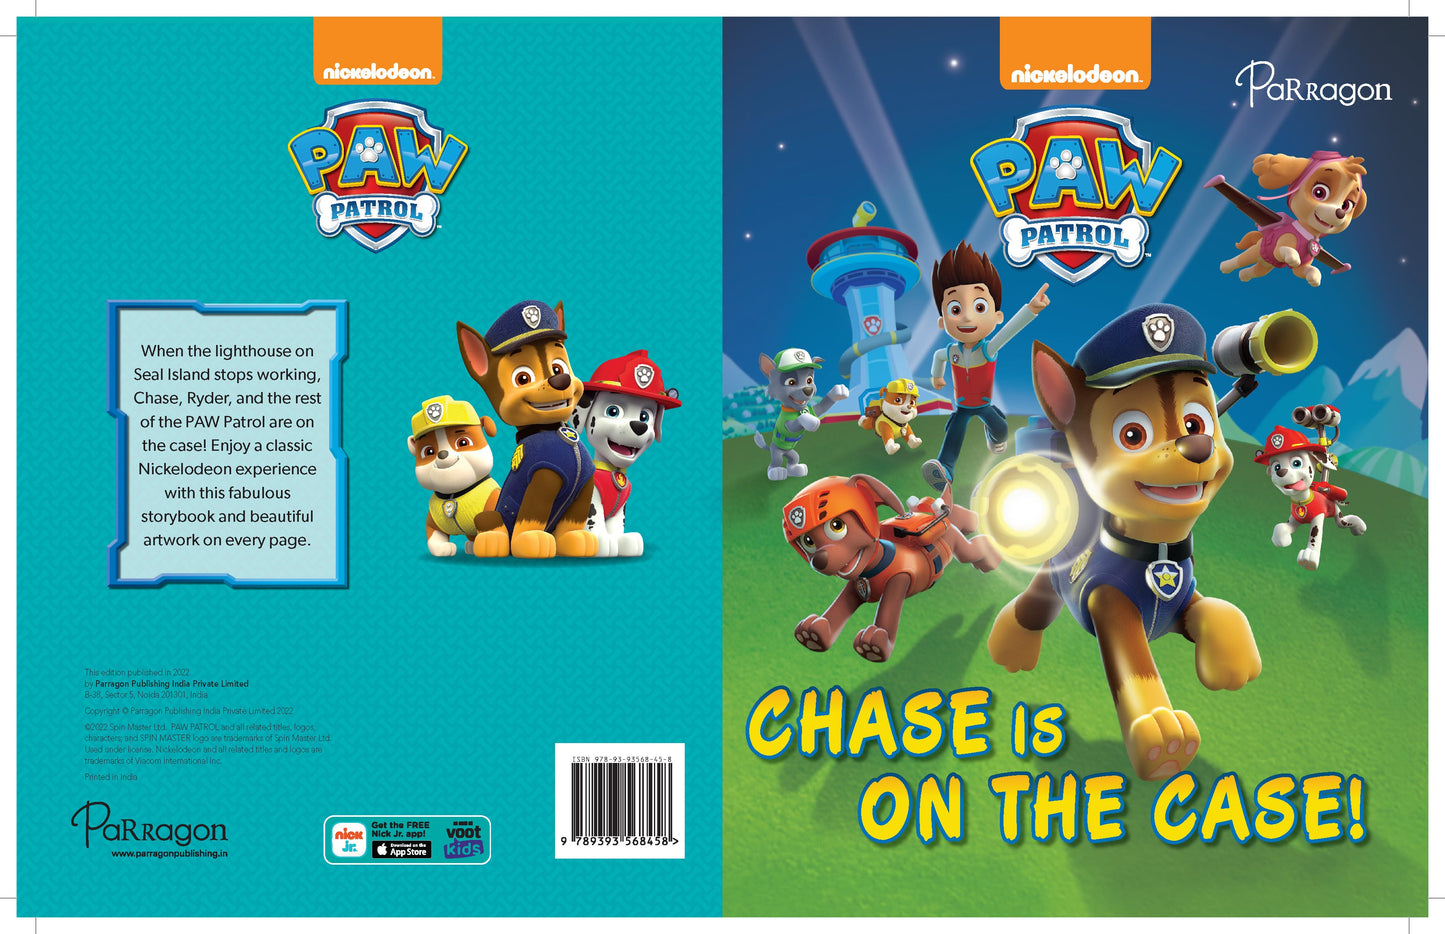 Paw Patrol Chase is on the Case [Paperback] Nickelodeon Parragon Publishing India